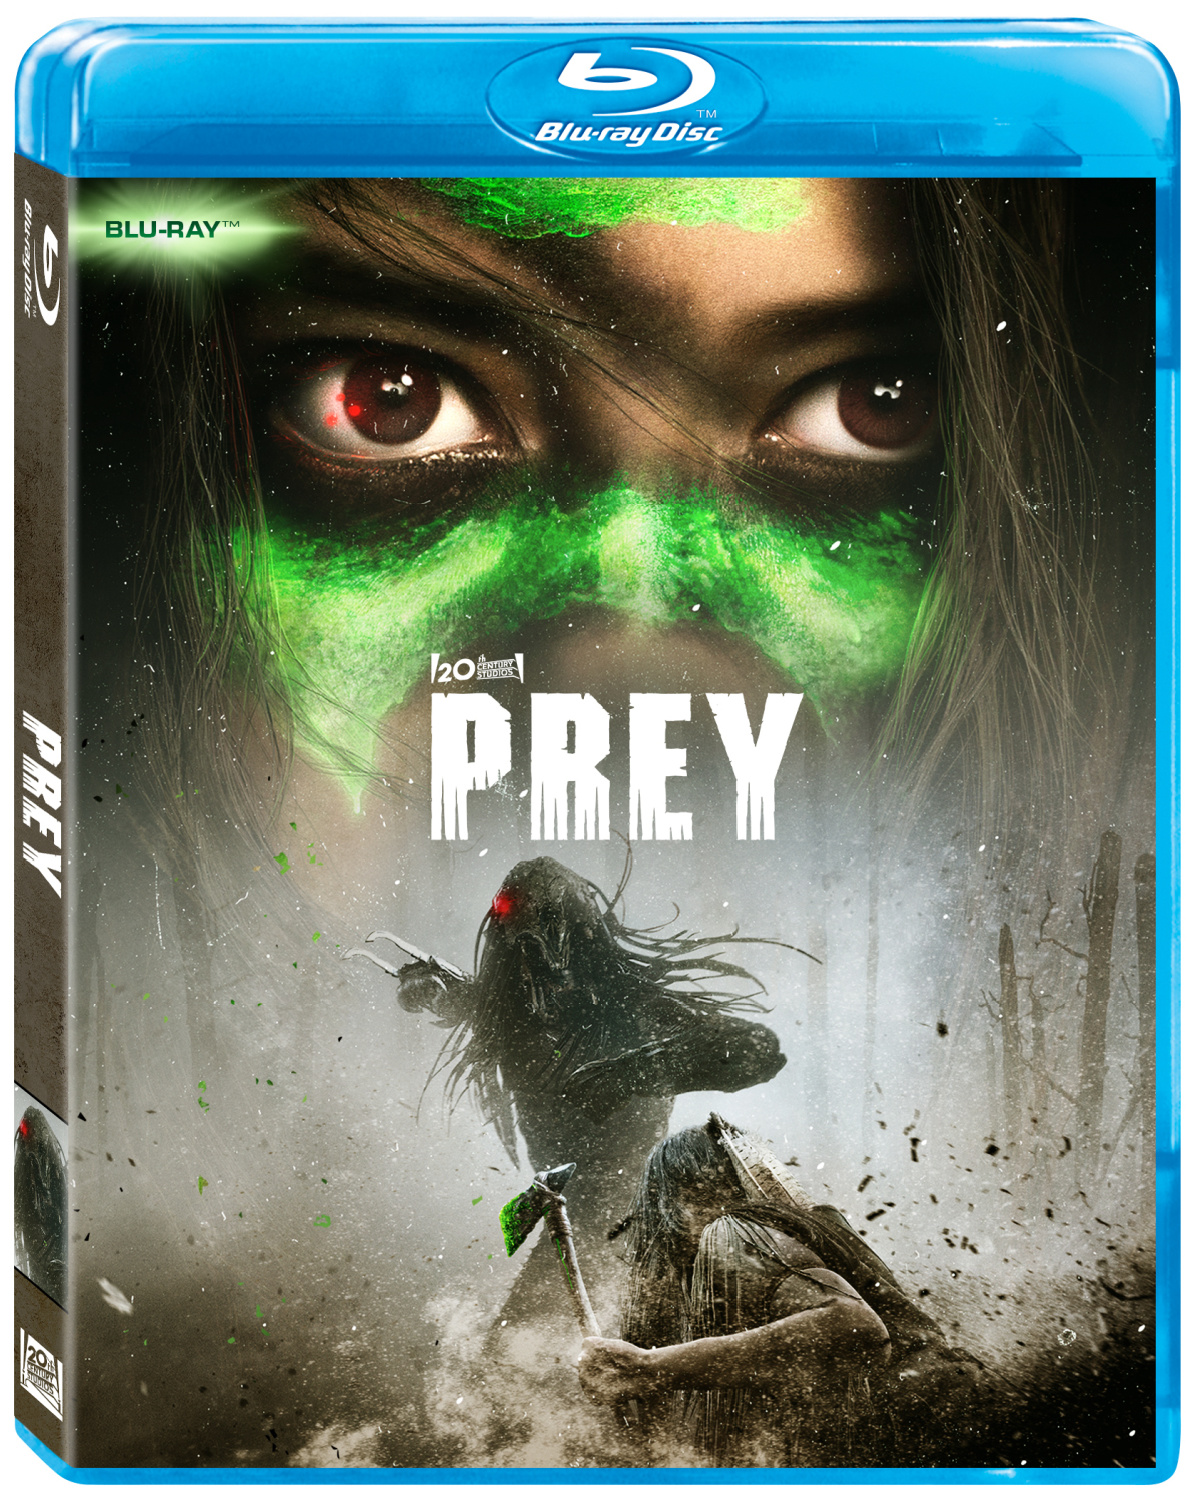 'Prey' will be available on 4K, Blu-ray and DVD October 3, with over two hours of all-new bonus features.